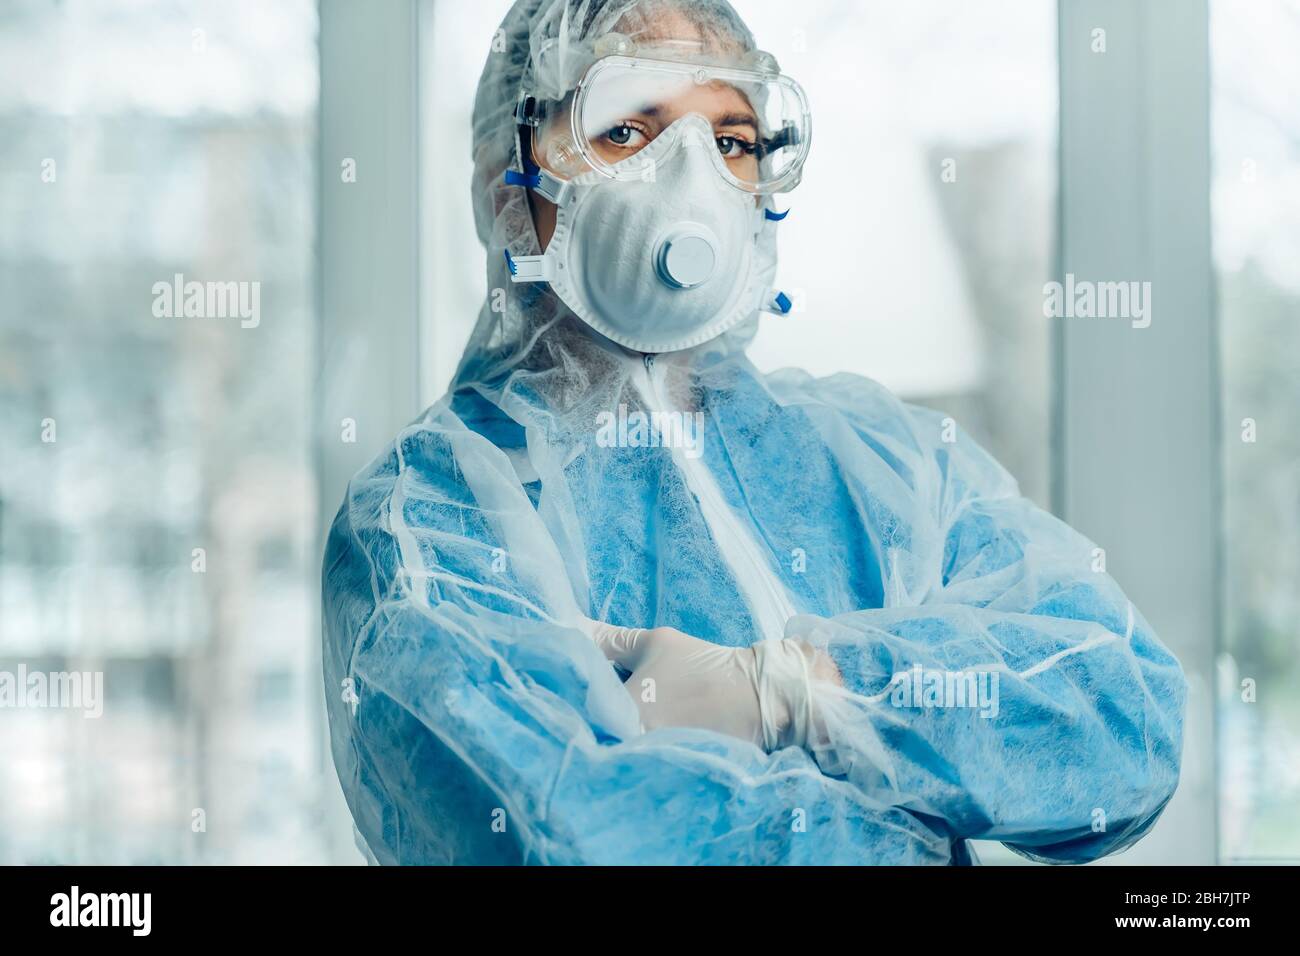 Portrait of woman doctor weaing protective suit during coronavirus pandemic, . Hazard suit, respiratory mask, gloves and glasses clinic or hospital Stock Photo